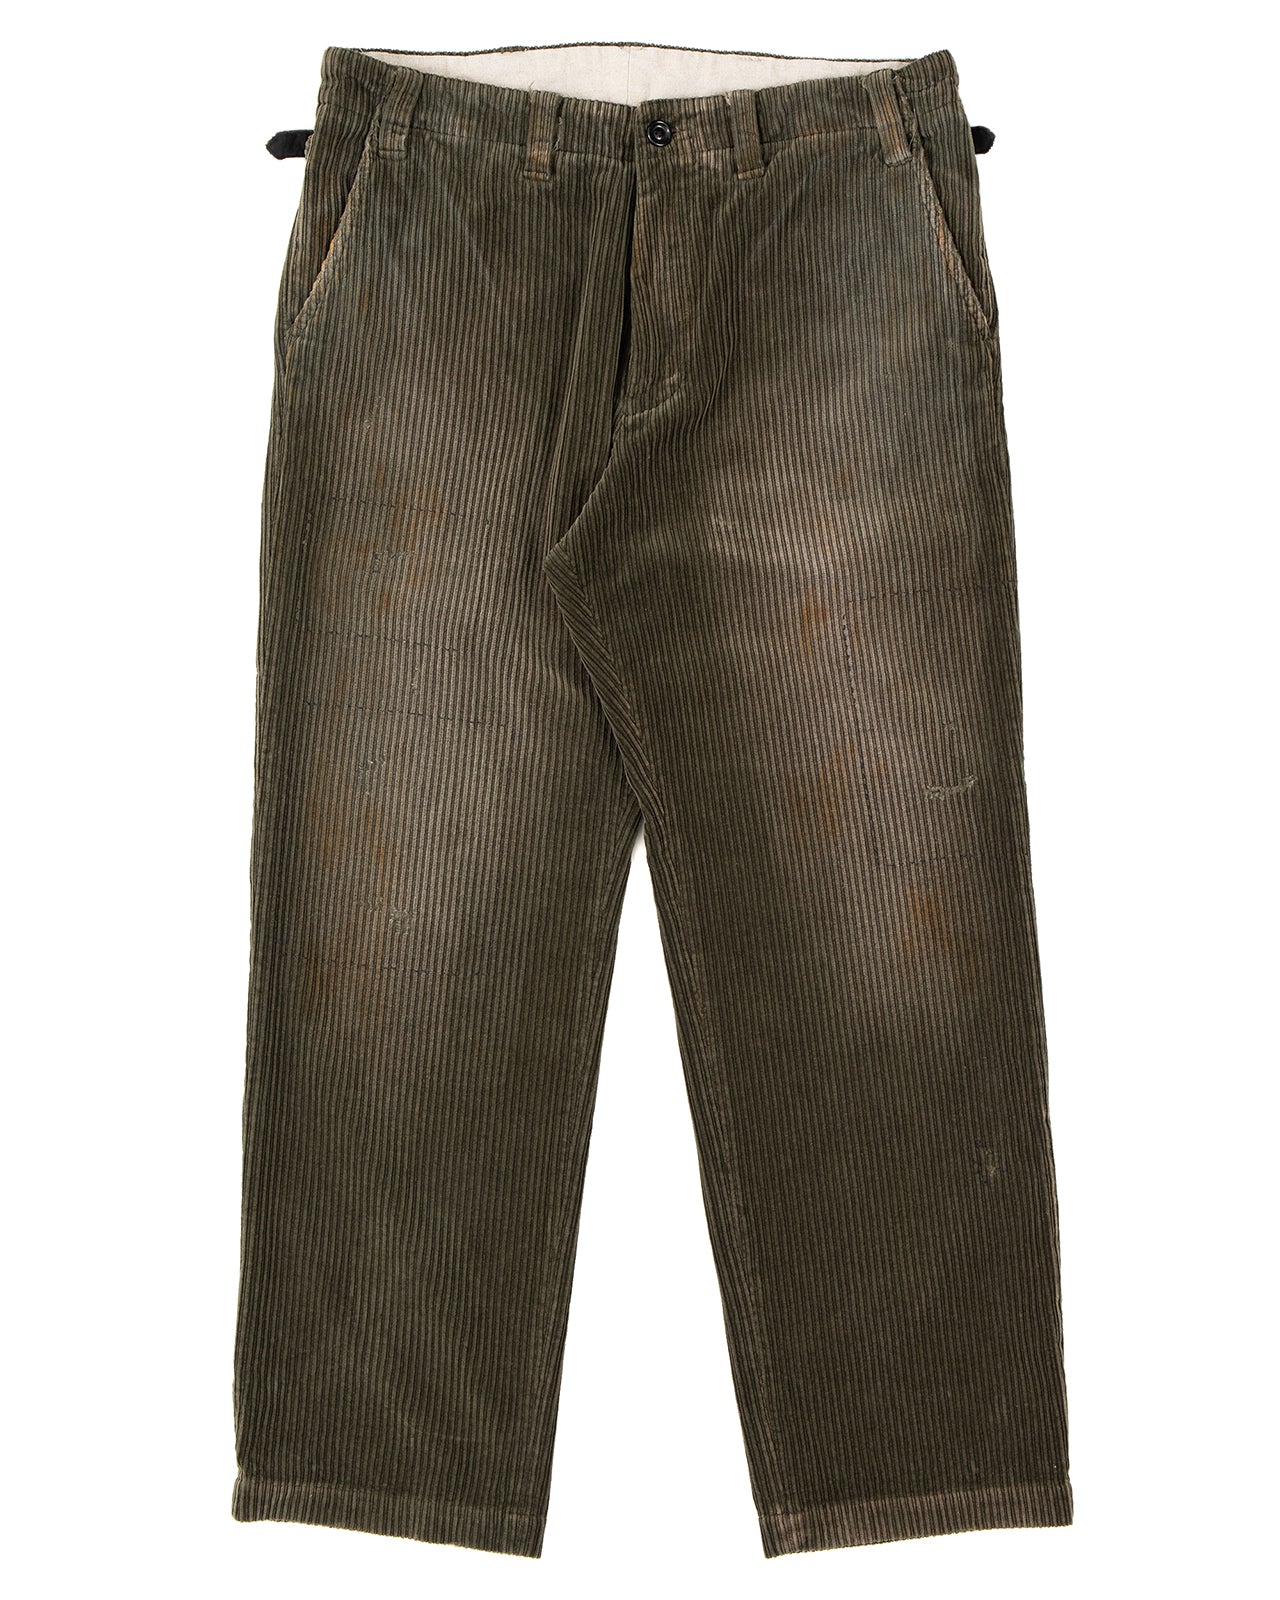 By Glad Hand, Lowell Corduroy Pants, Olive Vintage Finish